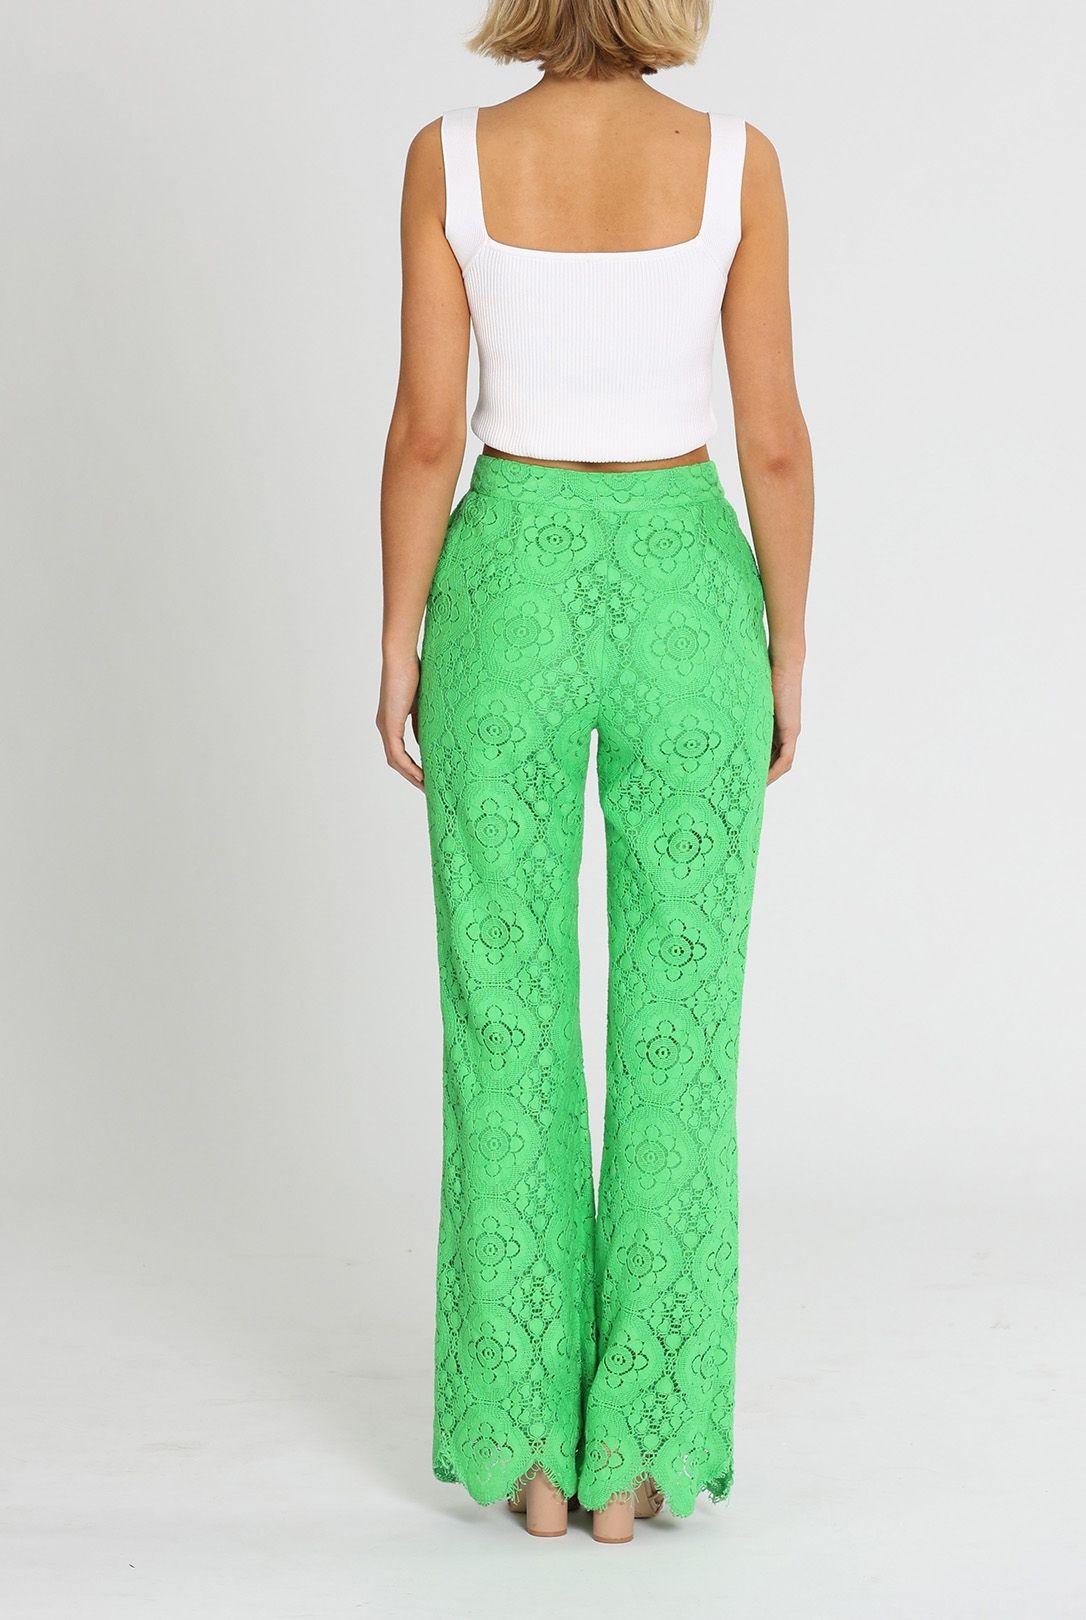 Hire Yvonne Lace Pants in Lime | Alice McCall | GlamCorner